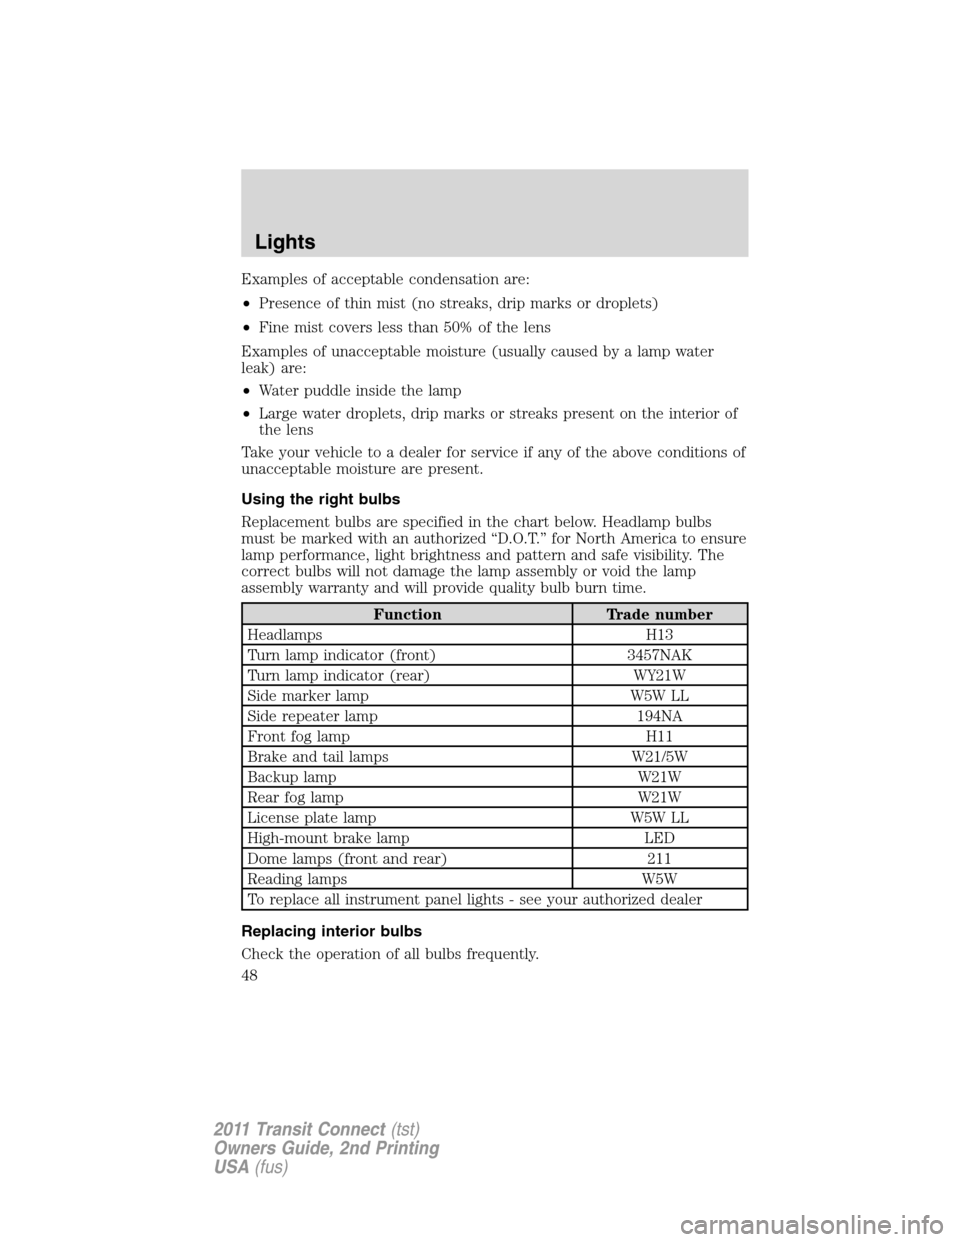 FORD TRANSIT CONNECT 2011 1.G Service Manual Examples of acceptable condensation are:
•Presence of thin mist (no streaks, drip marks or droplets)
•Fine mist covers less than 50% of the lens
Examples of unacceptable moisture (usually caused b